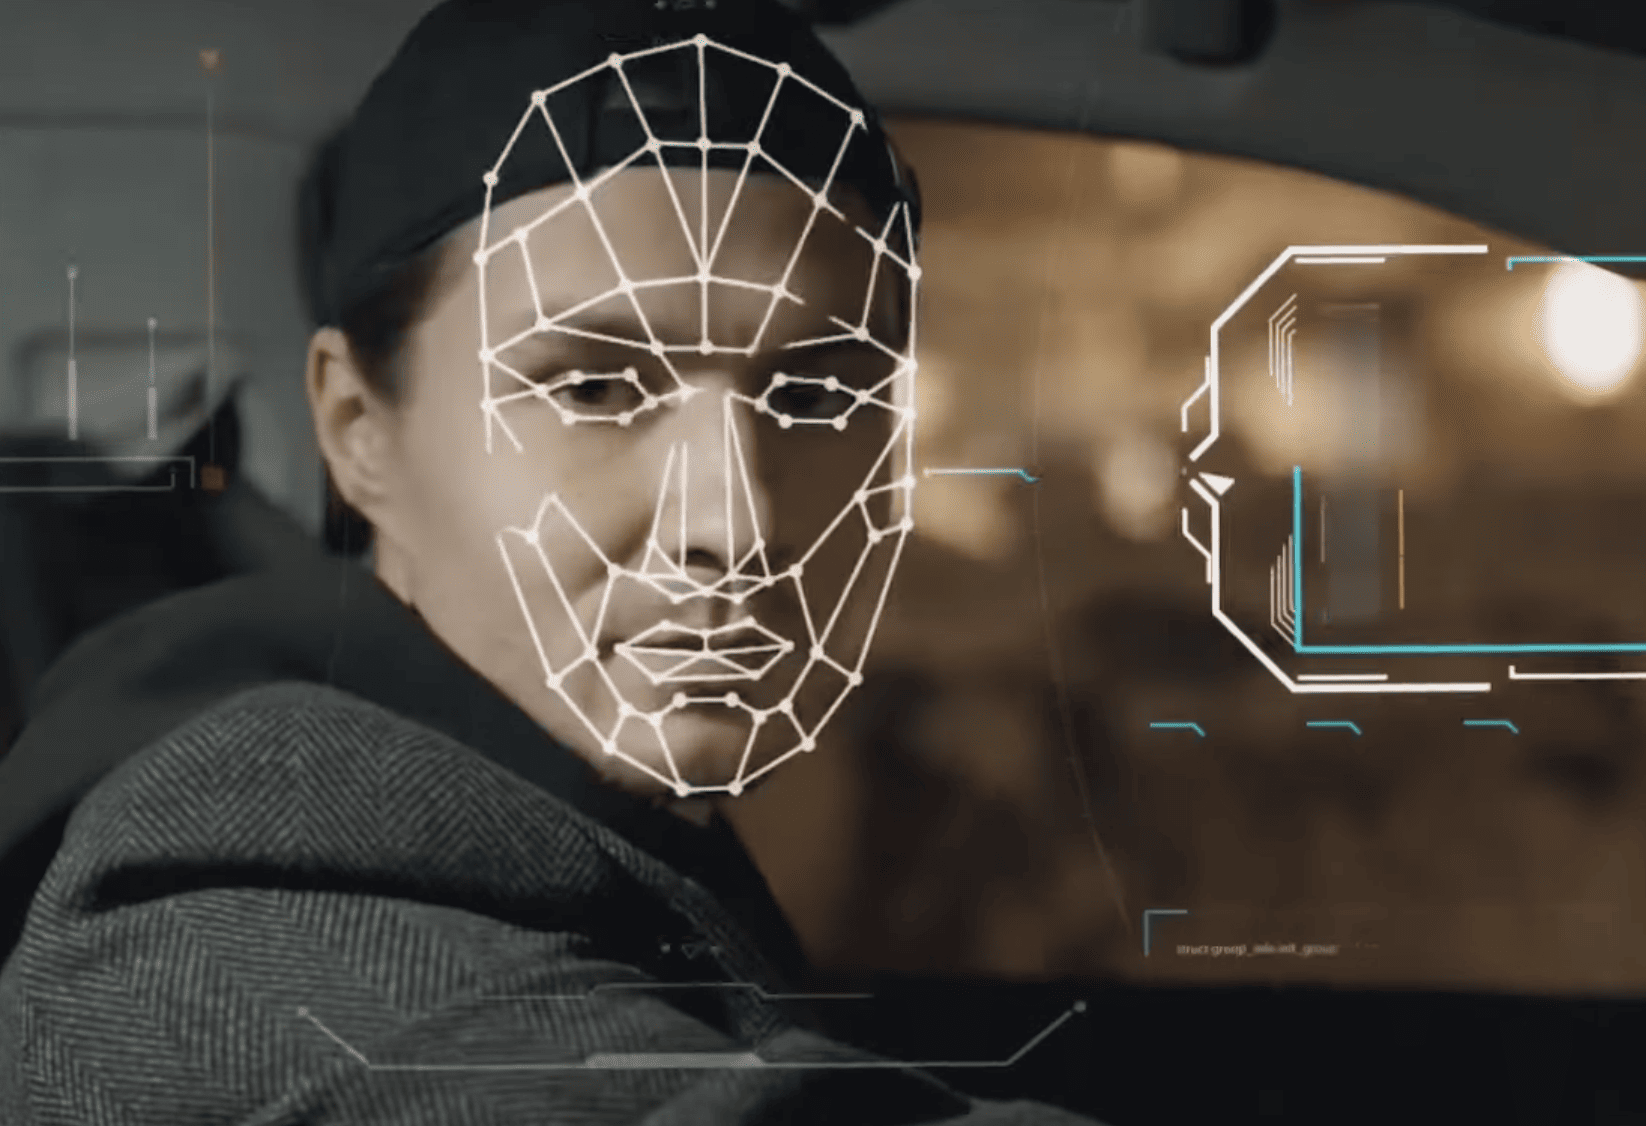 A man's face is shown on the dashboard of a car, highlighting the concept of AI 'face dating'.